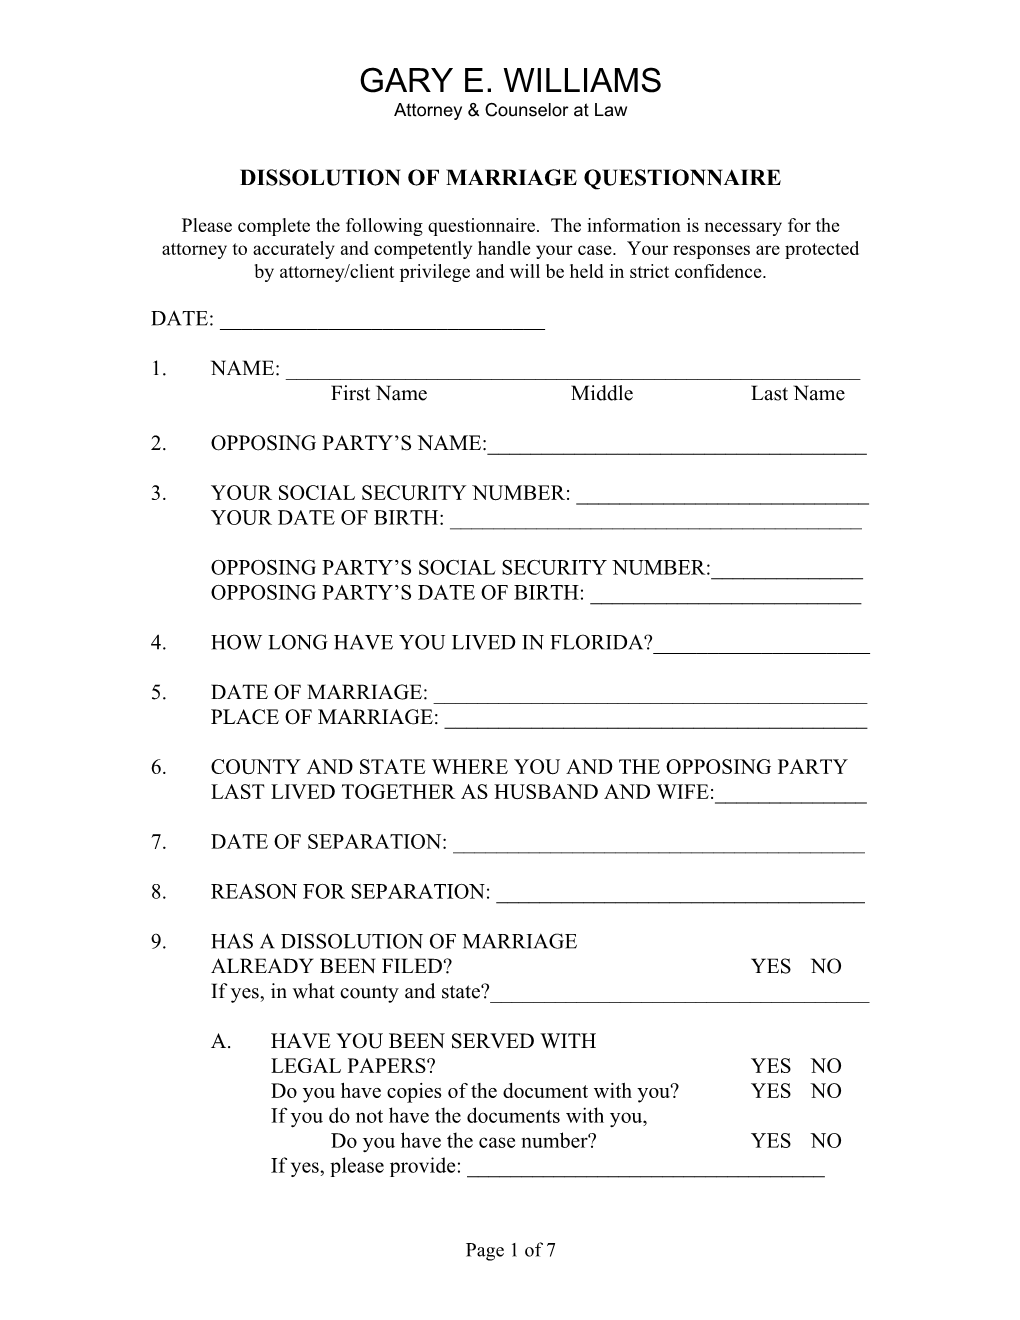 Dissolution of Marriage Questionnaire